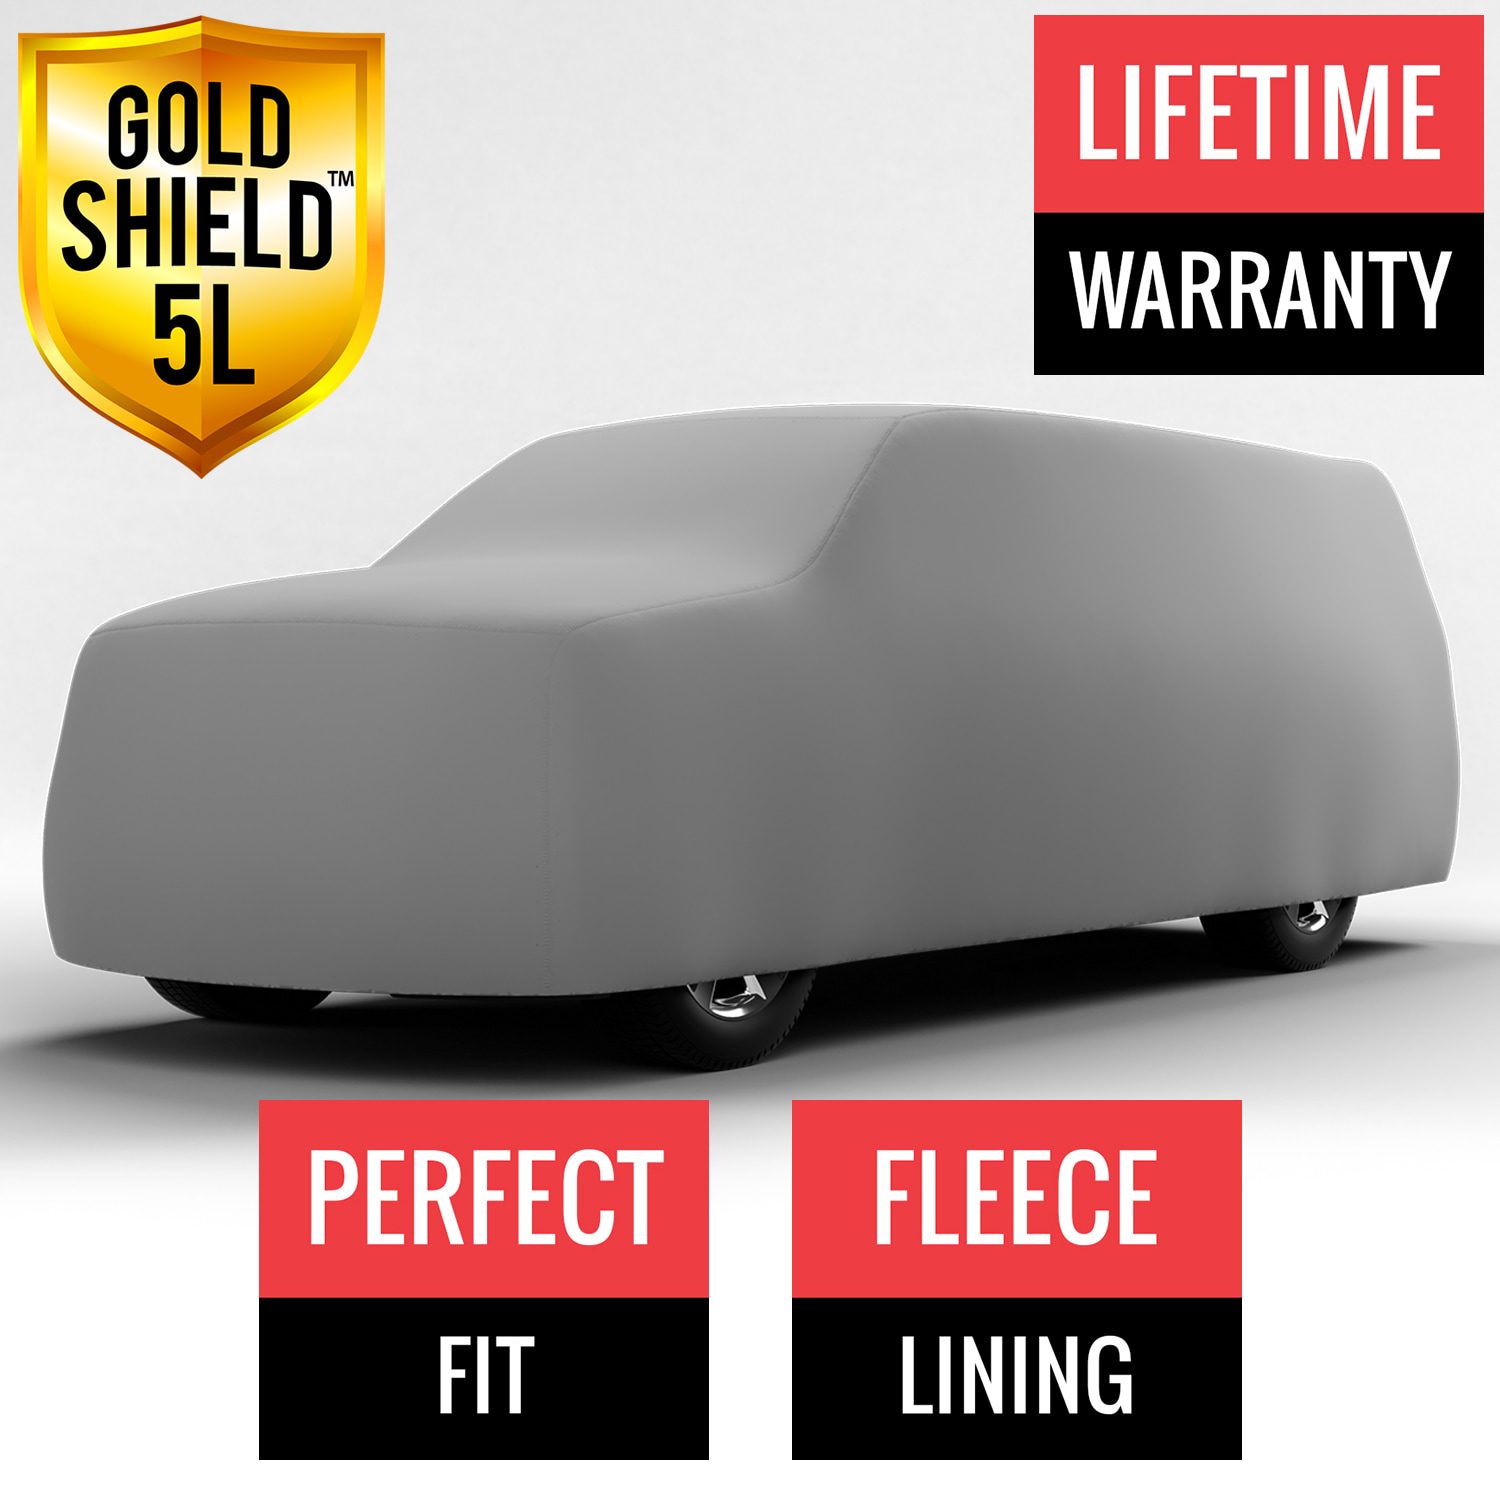 Gold Shield 5L - Car Cover for GMC C1500 1997 Regular Cab Pickup 8.0 Feet Bed with Camper Shell